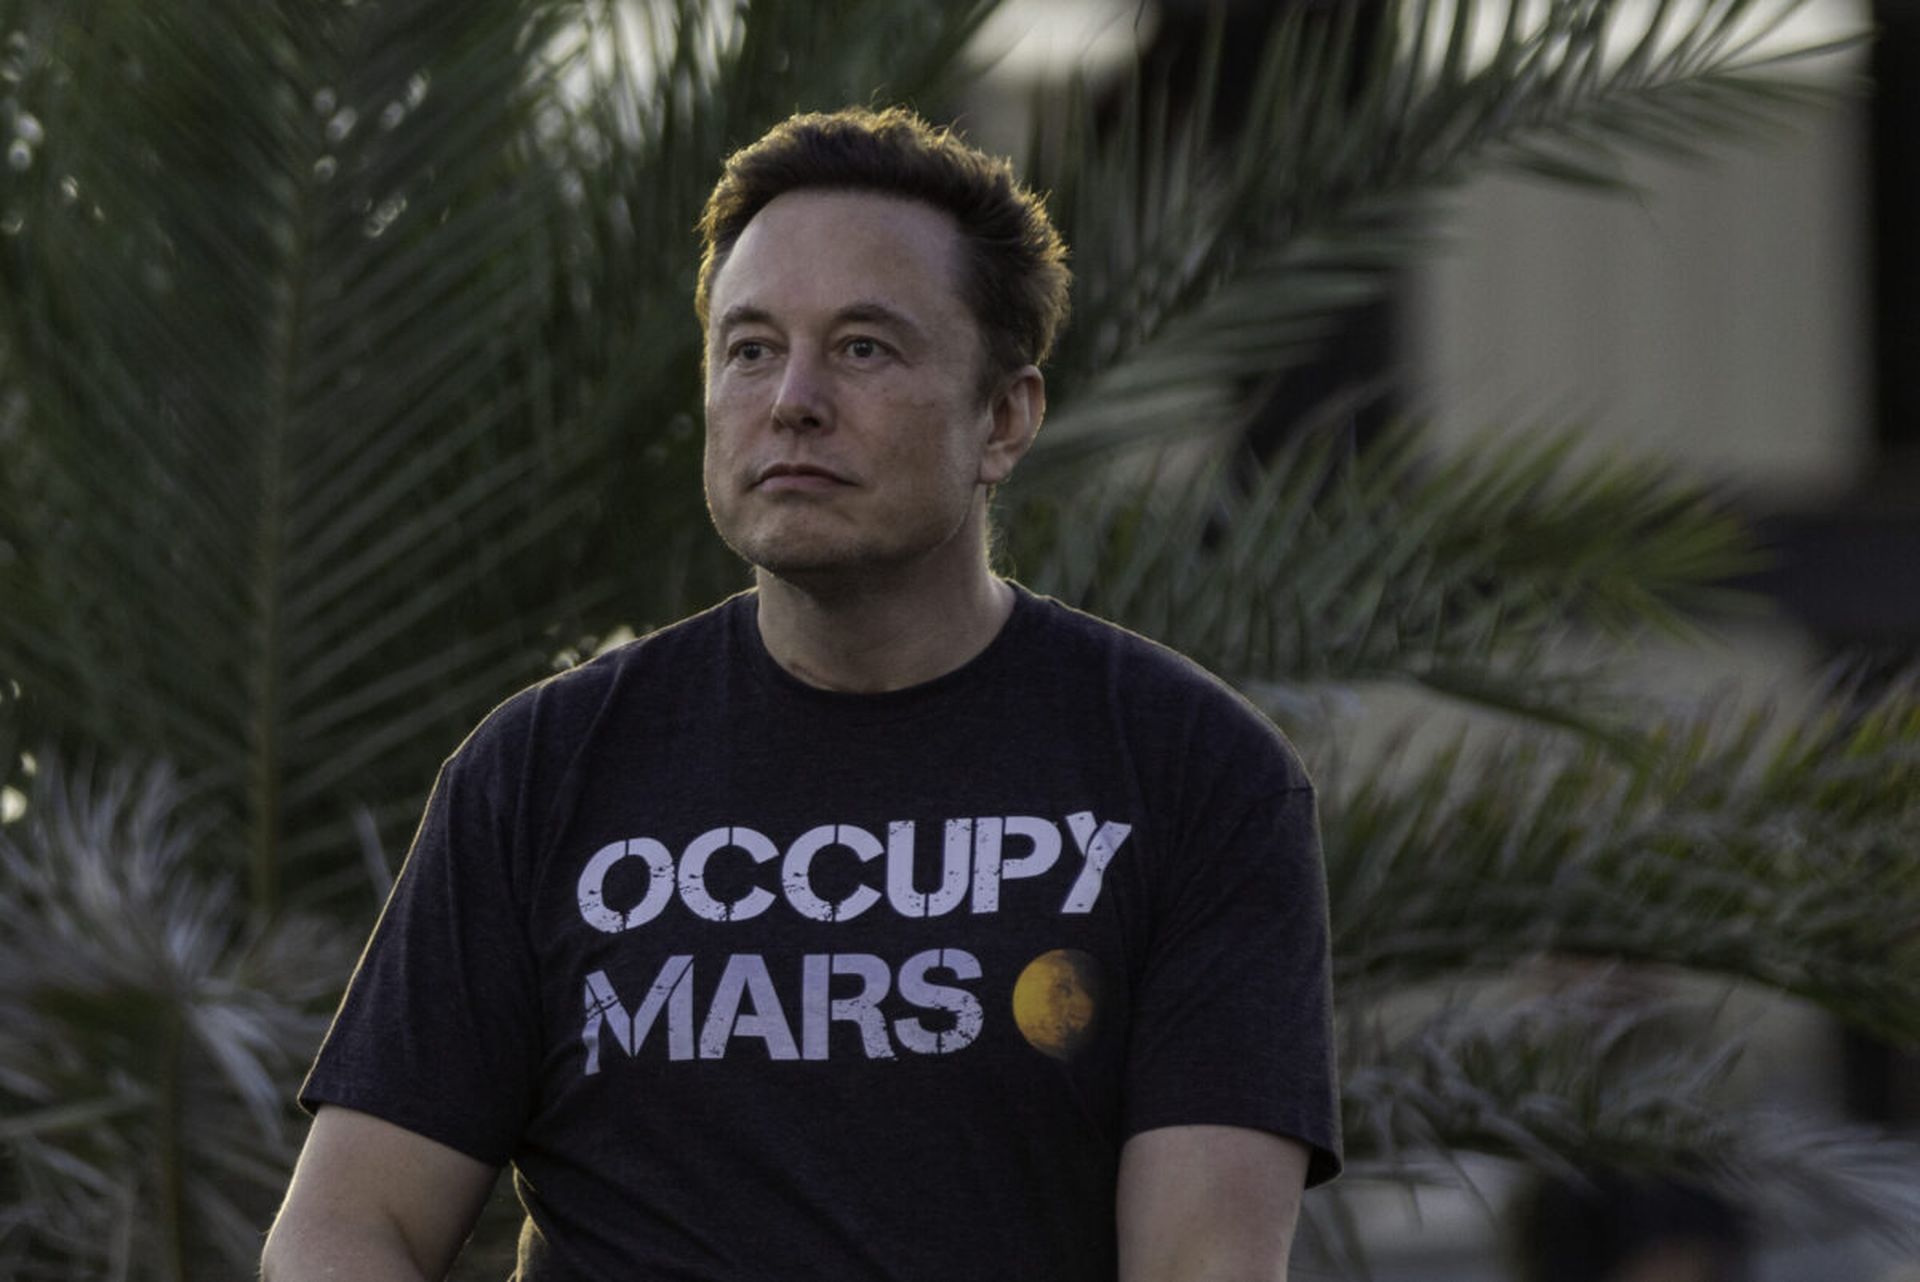 SpaceX founder Elon Musk during a T-Mobile and SpaceX joint event on Aug. 25, 2022, in Boca Chica Beach, Texas. (Photo by Michael Gonzalez/Getty Images)